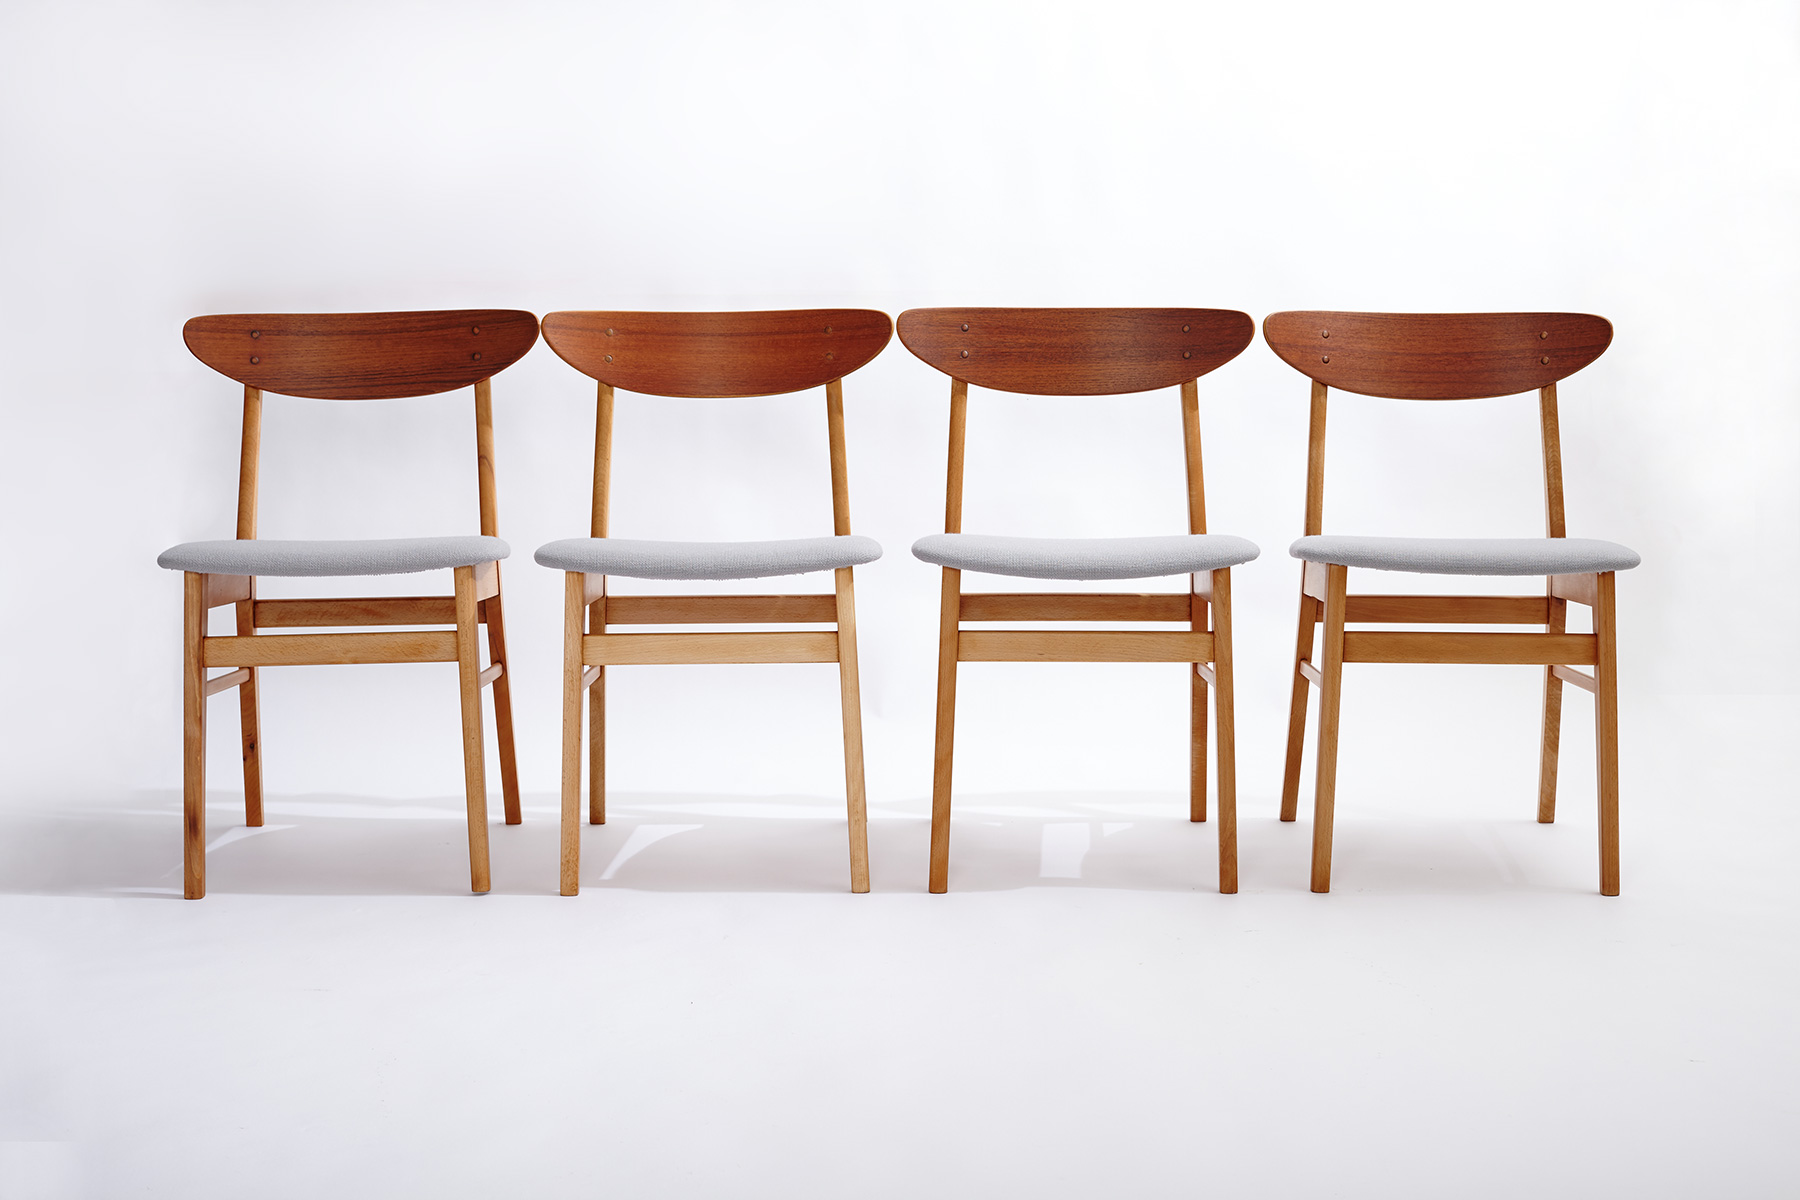 yw_farstrup_no210_dining_chairs_group